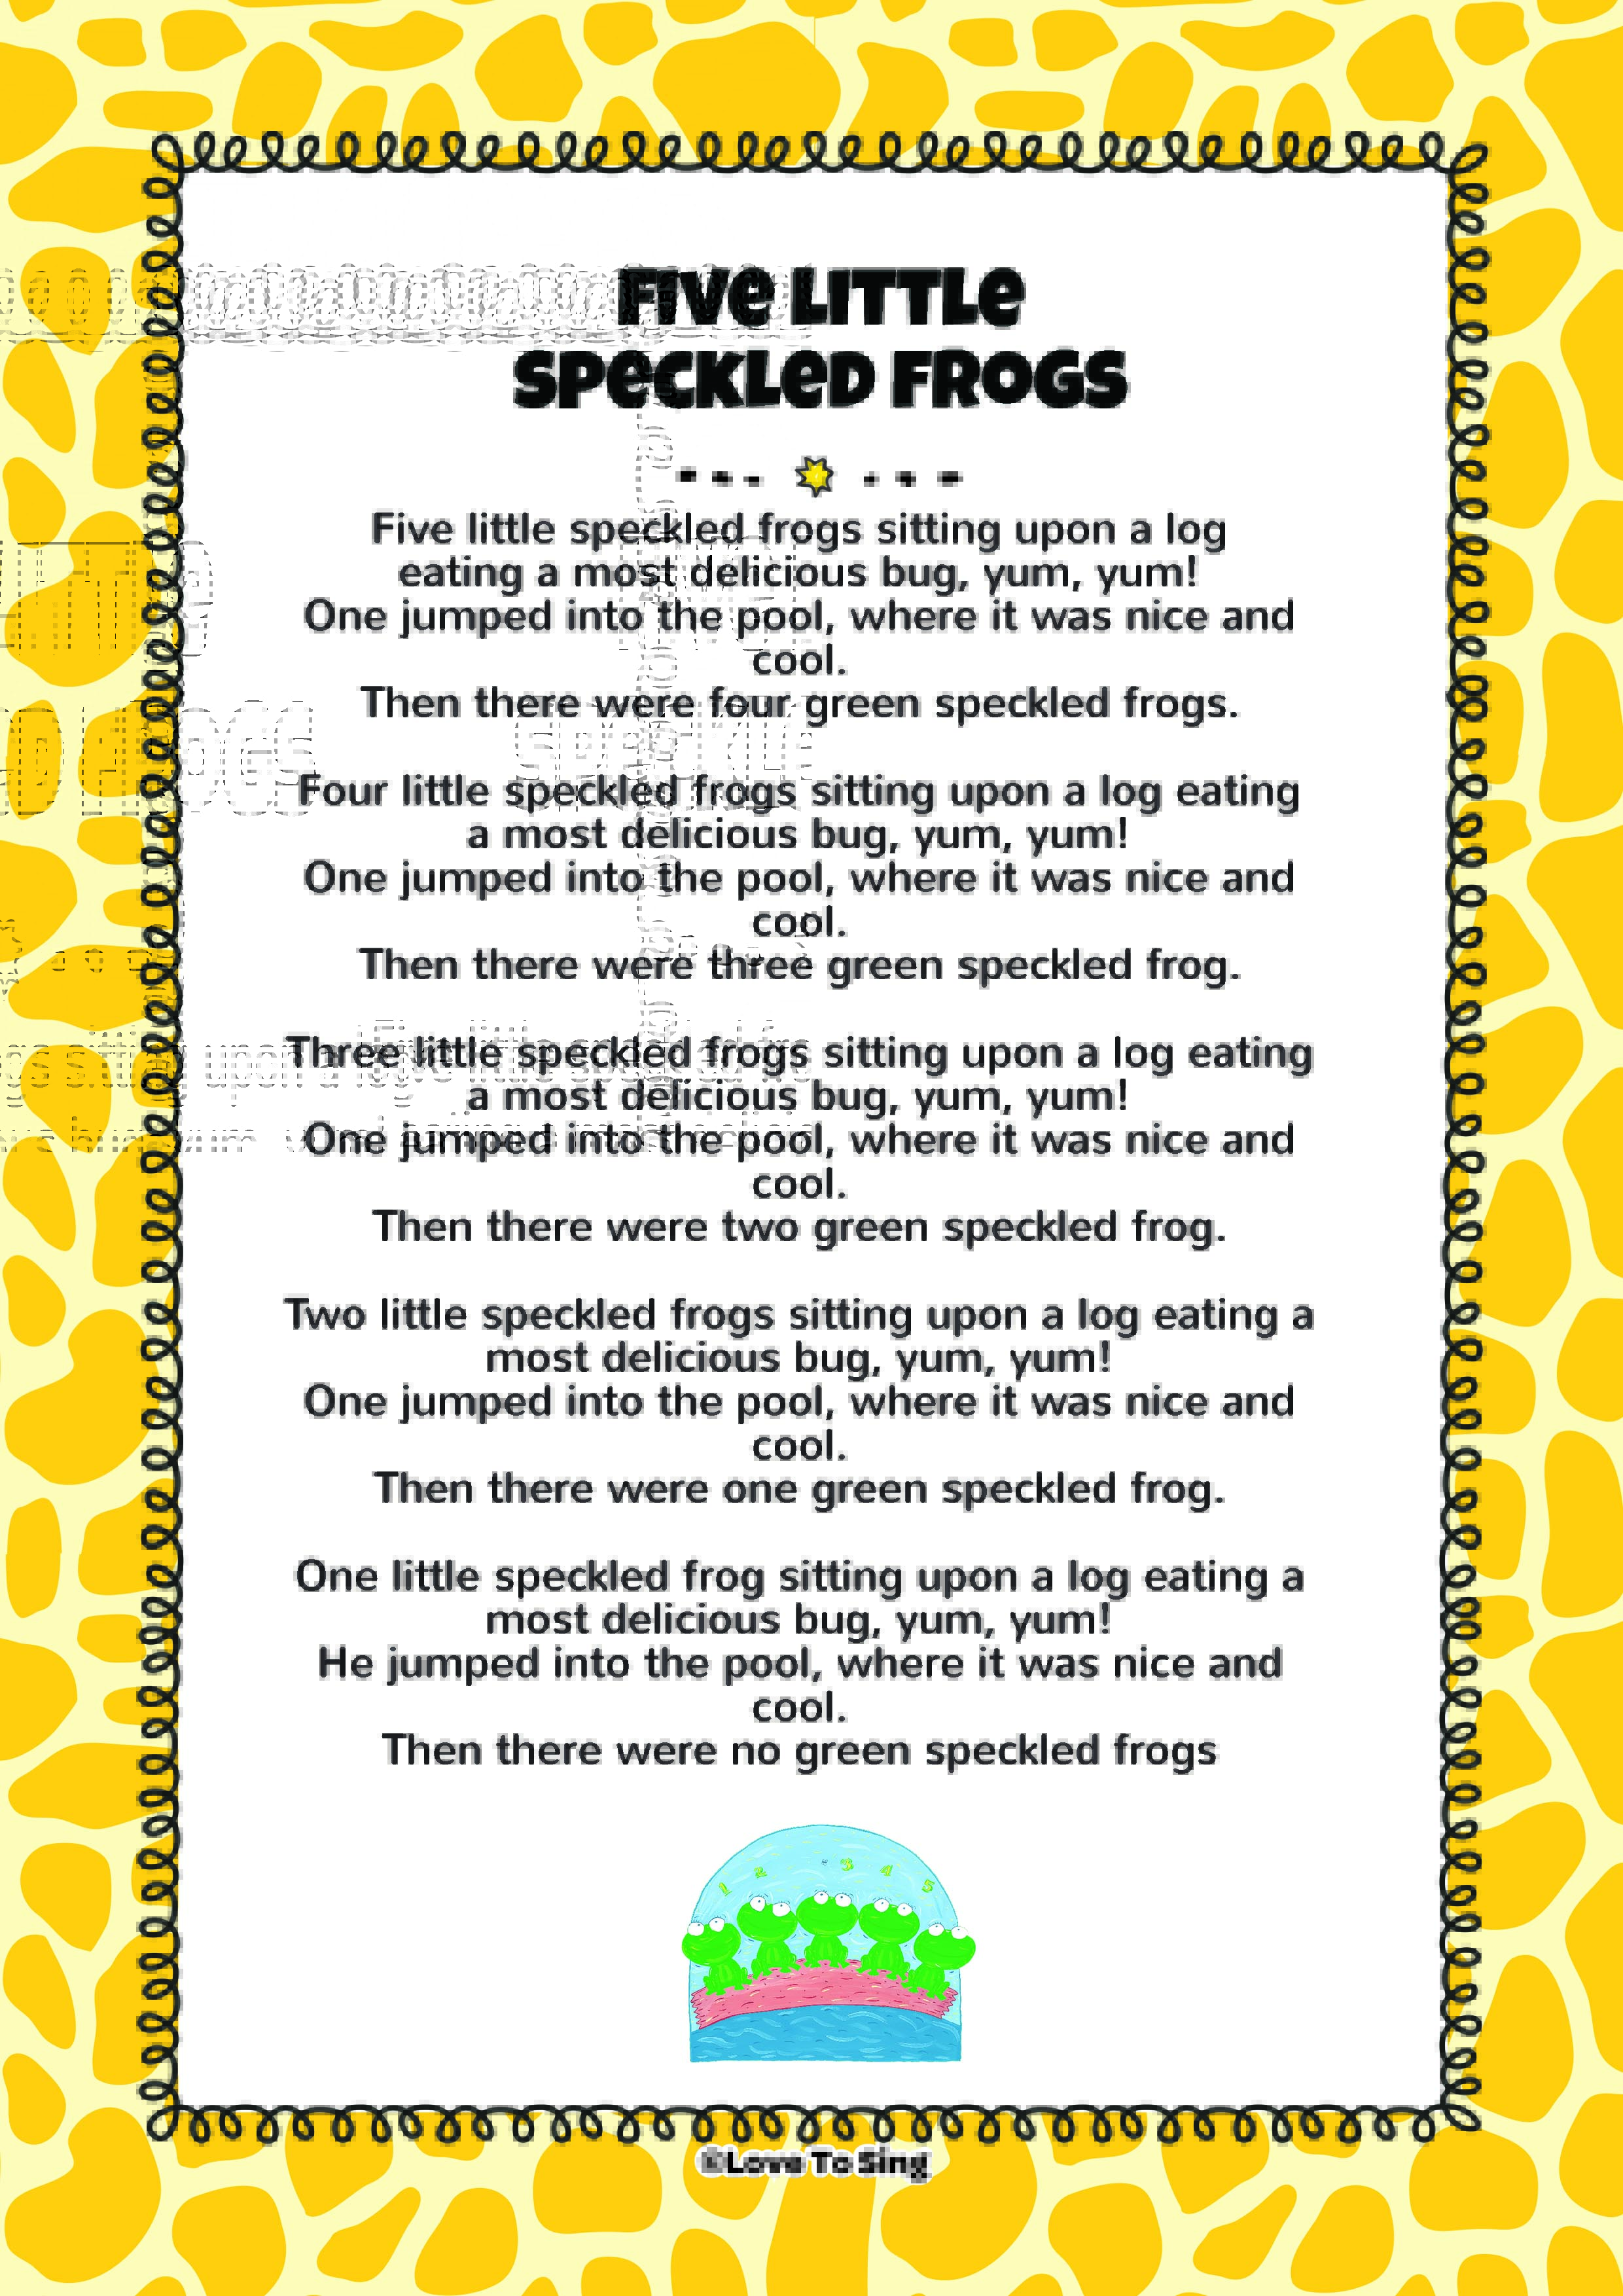 Five Little Speckled Frogs FREE Video Song Lyrics Activities